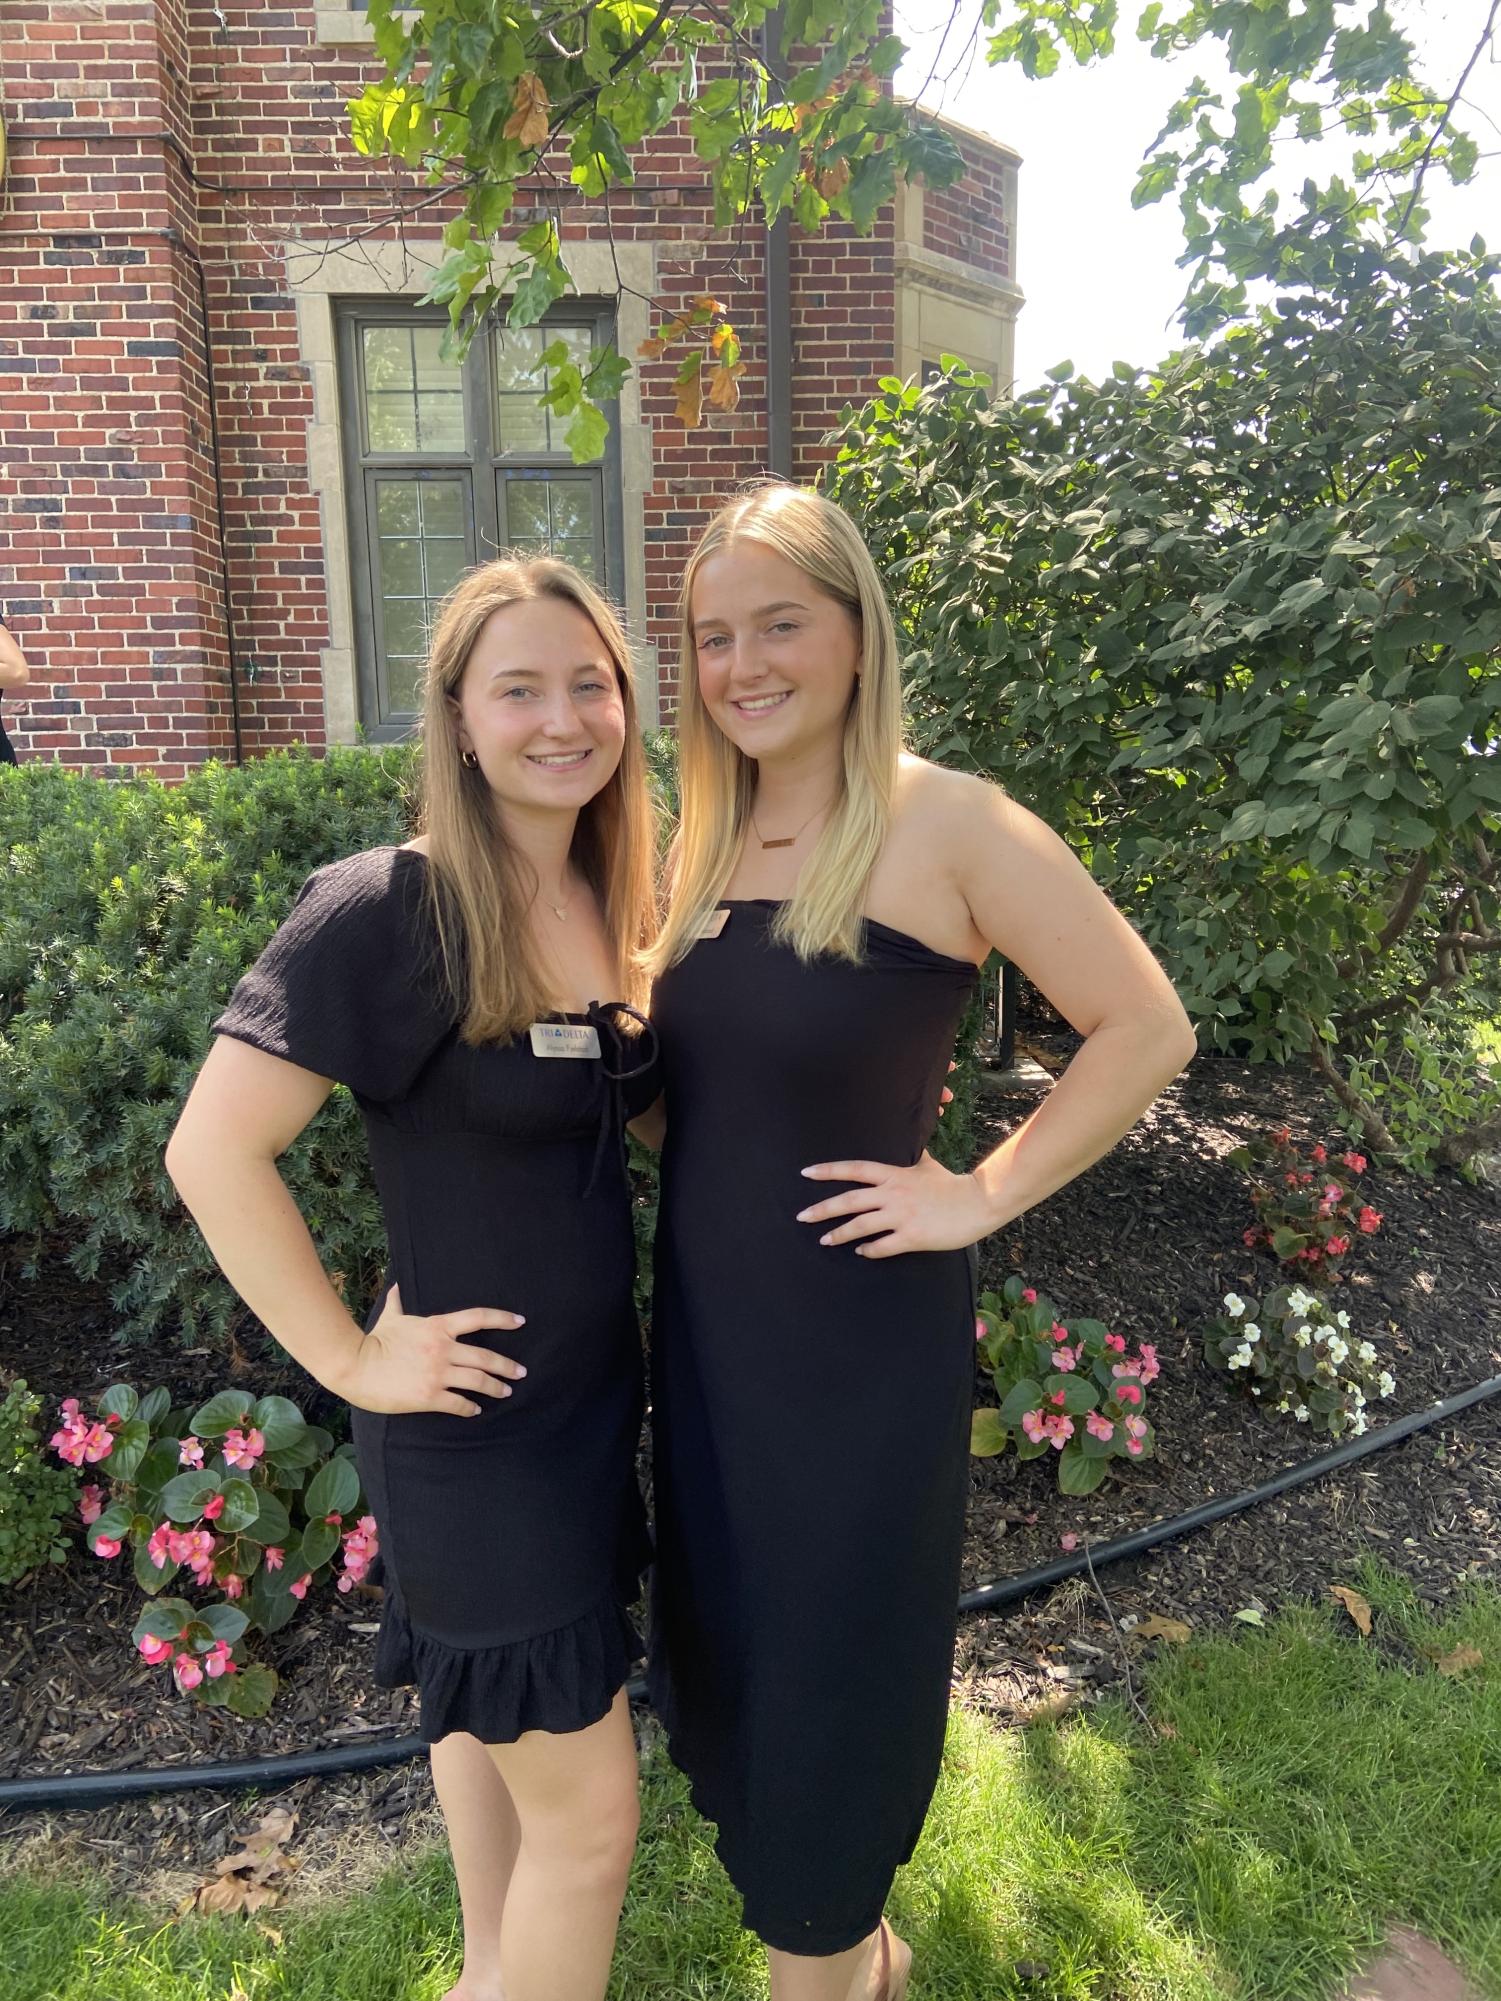 2022 alumnae Alyssa Fjelstad and her sister Katelyn Fjelstad pose in front of their sorority Delta Delta Delta. Photo provided by Alyssa Fjelstad.